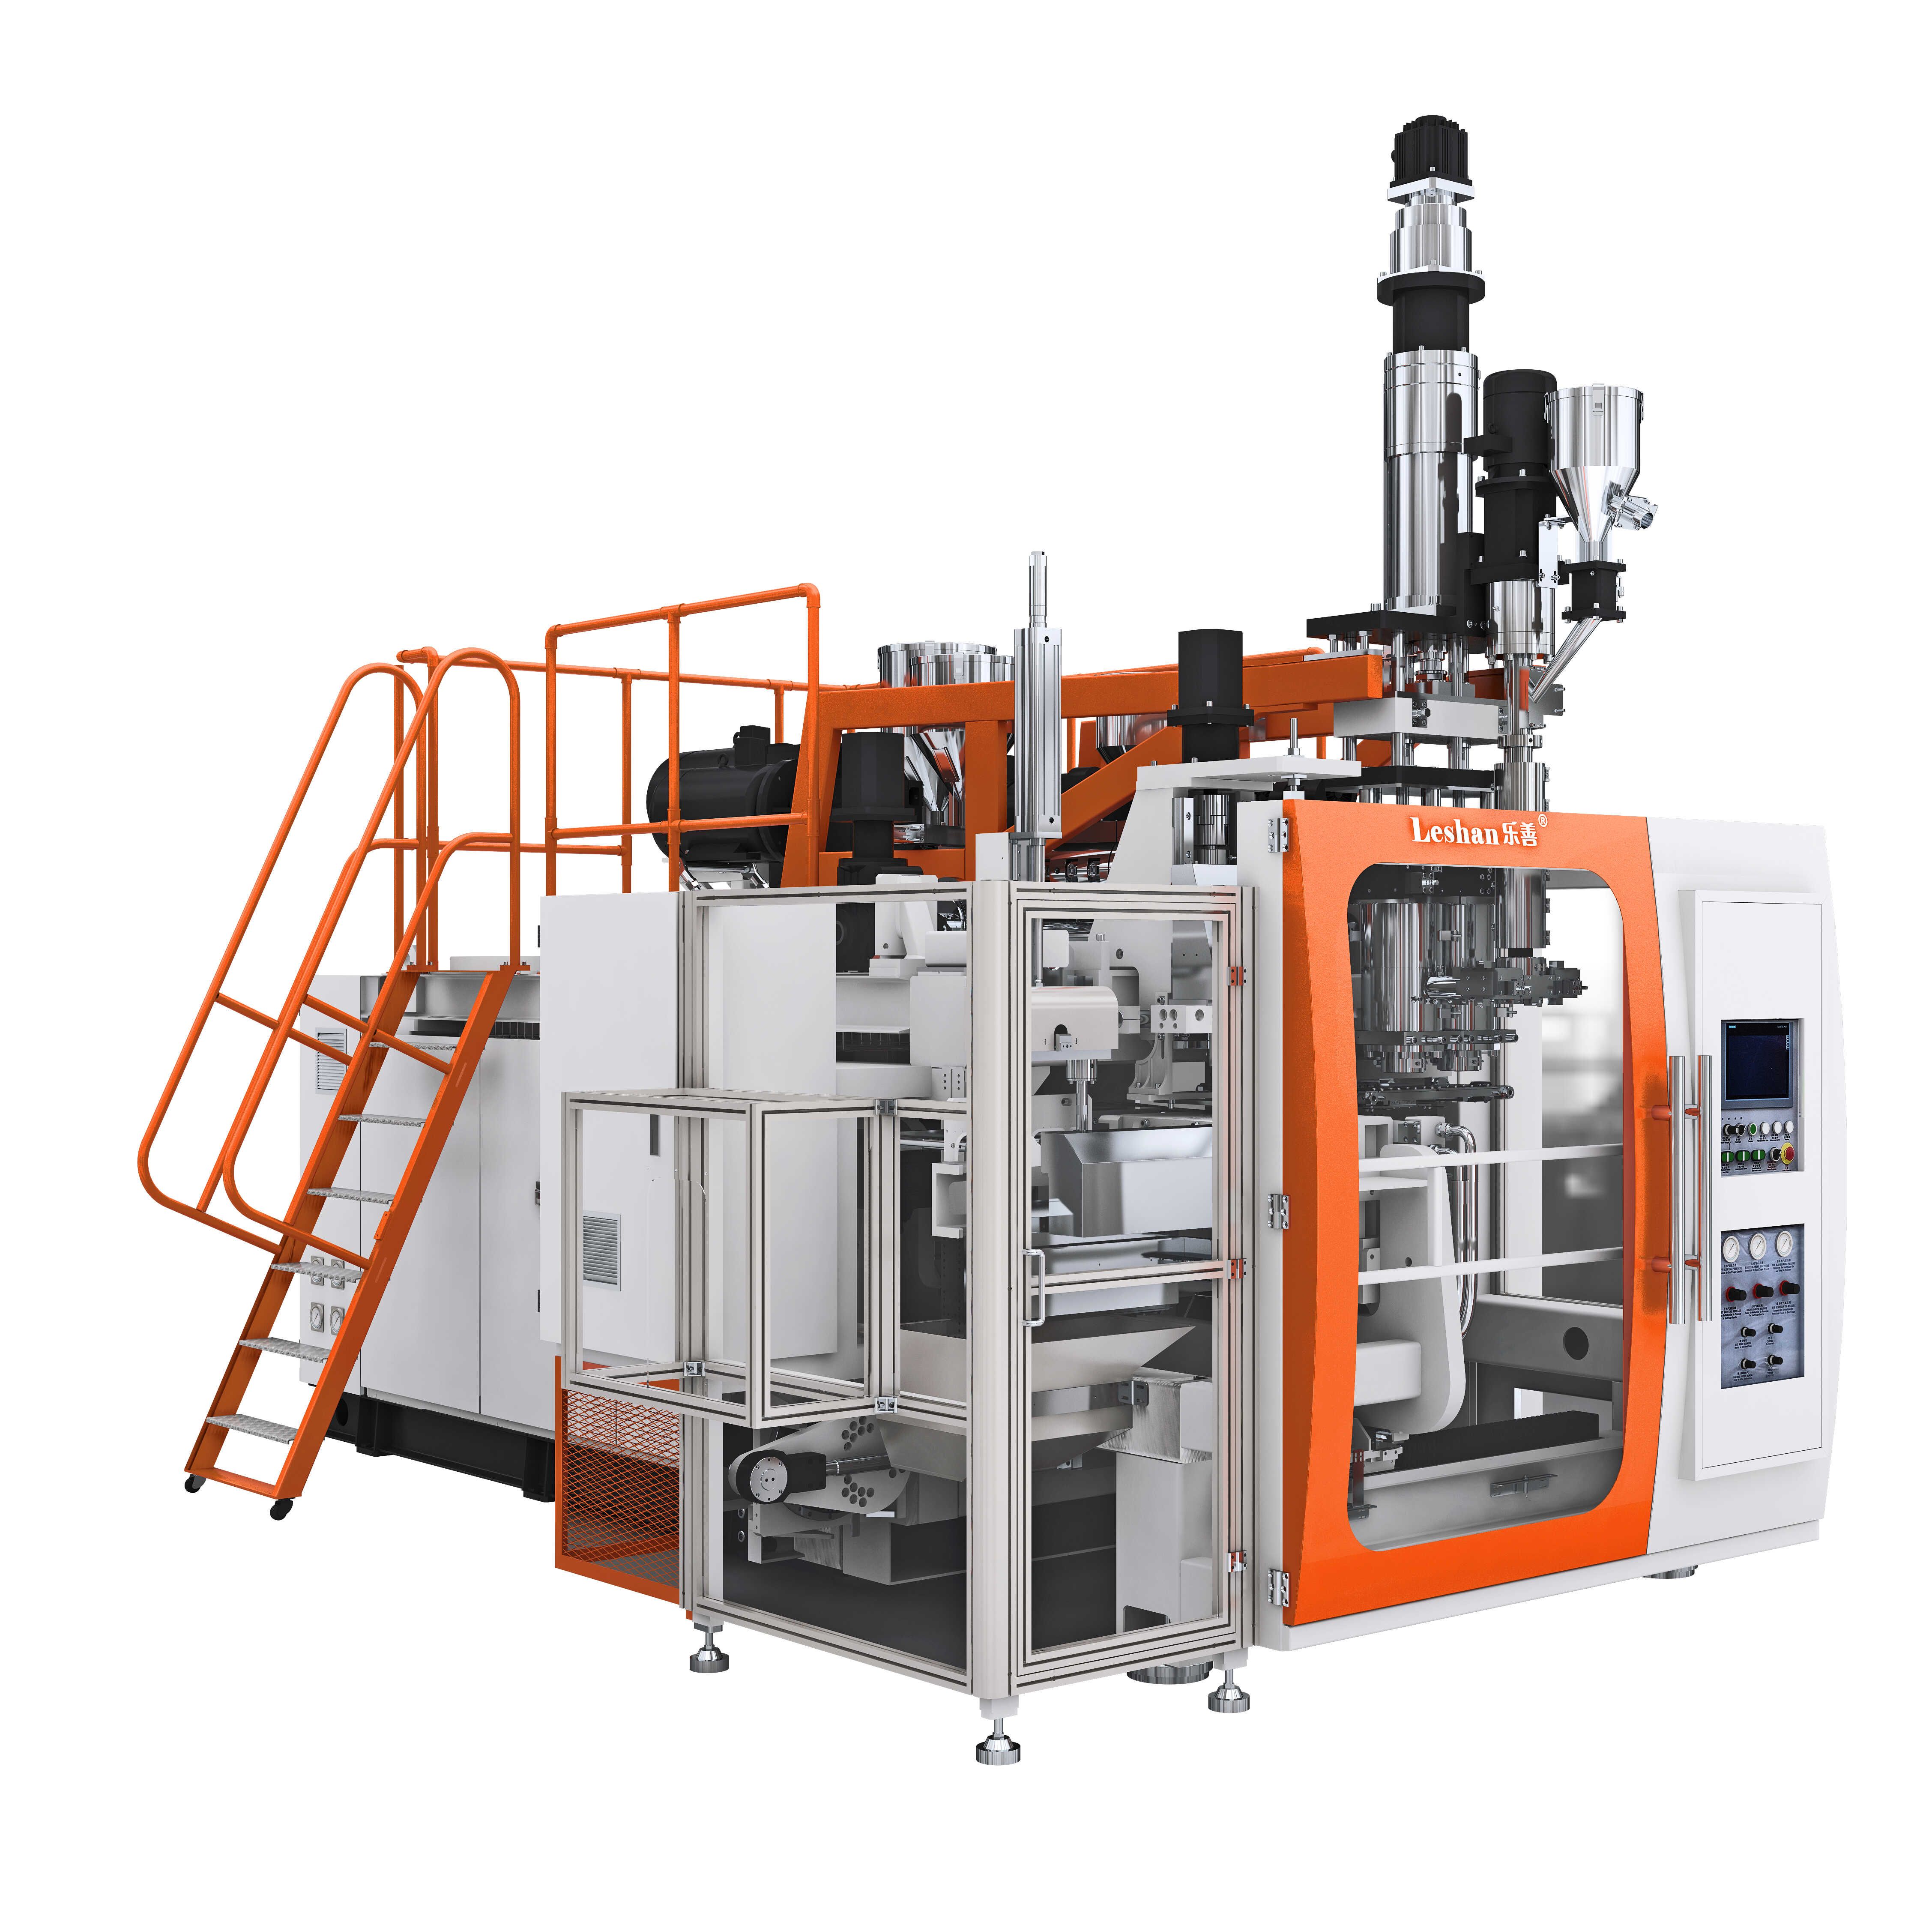 What's the difference between a double-working blow molding machine and a simplex blow molding machine?